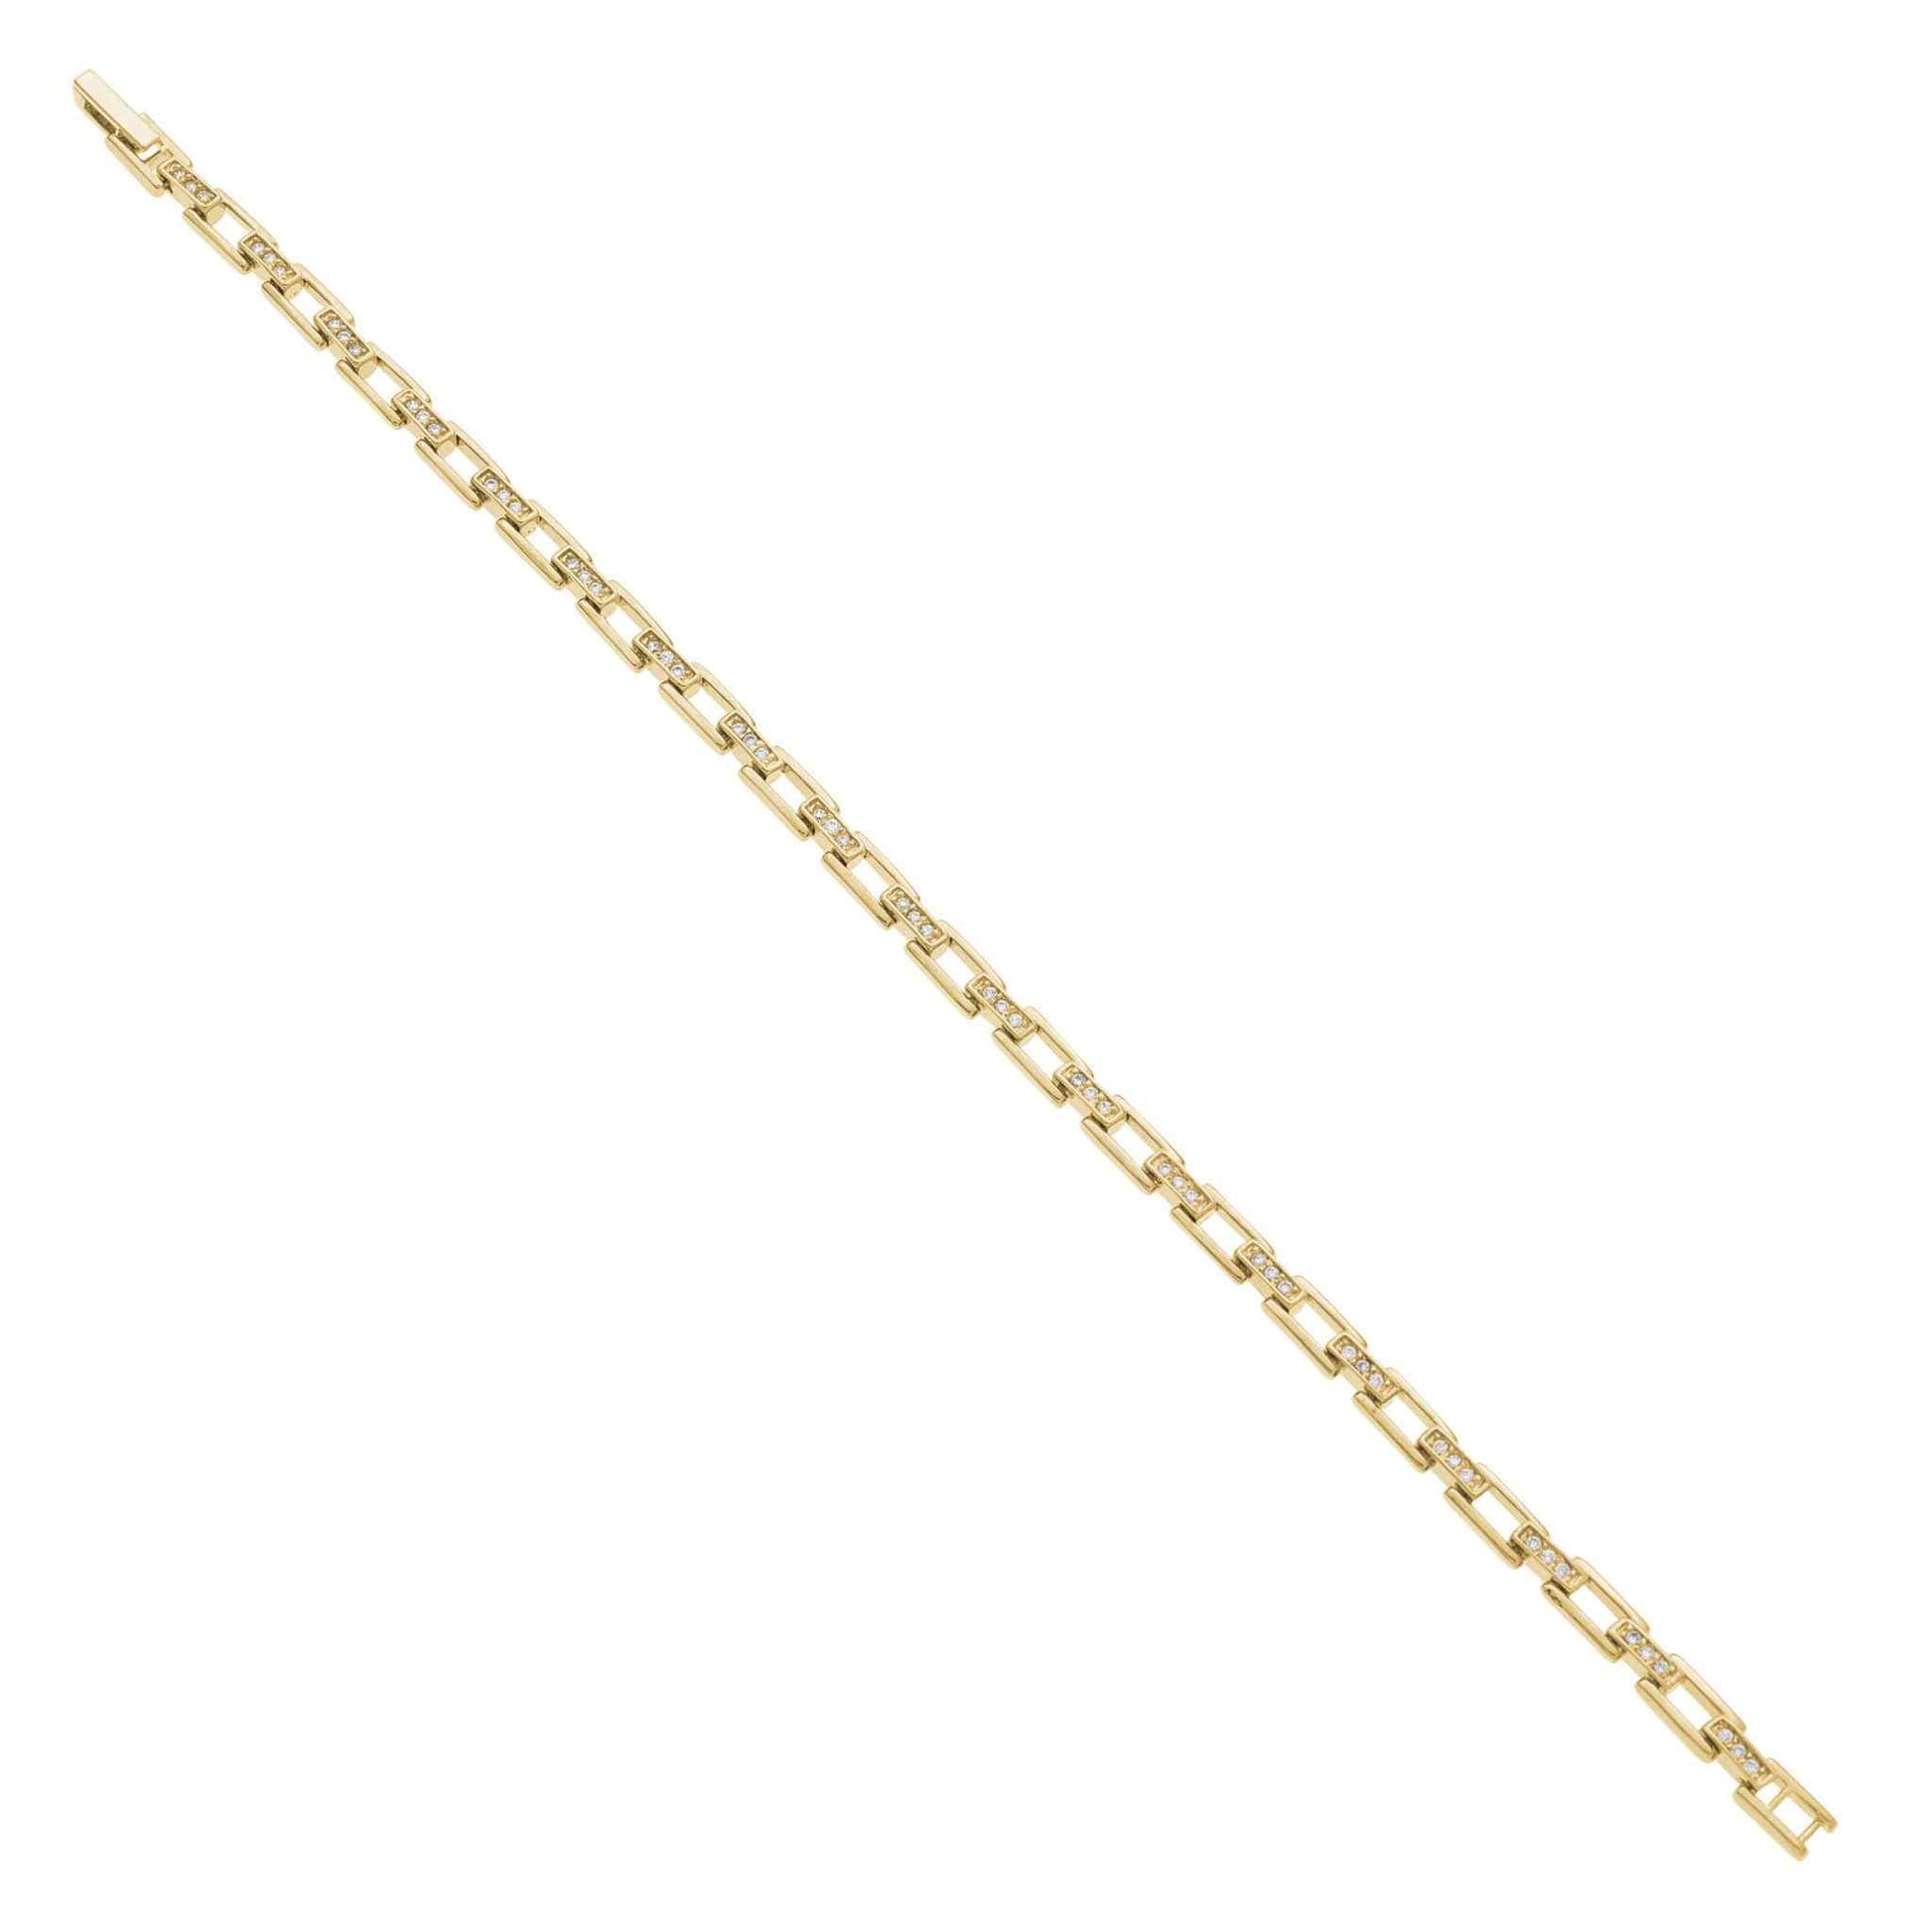 A open box link simulated diamond bracelet displayed on a neutral white background.